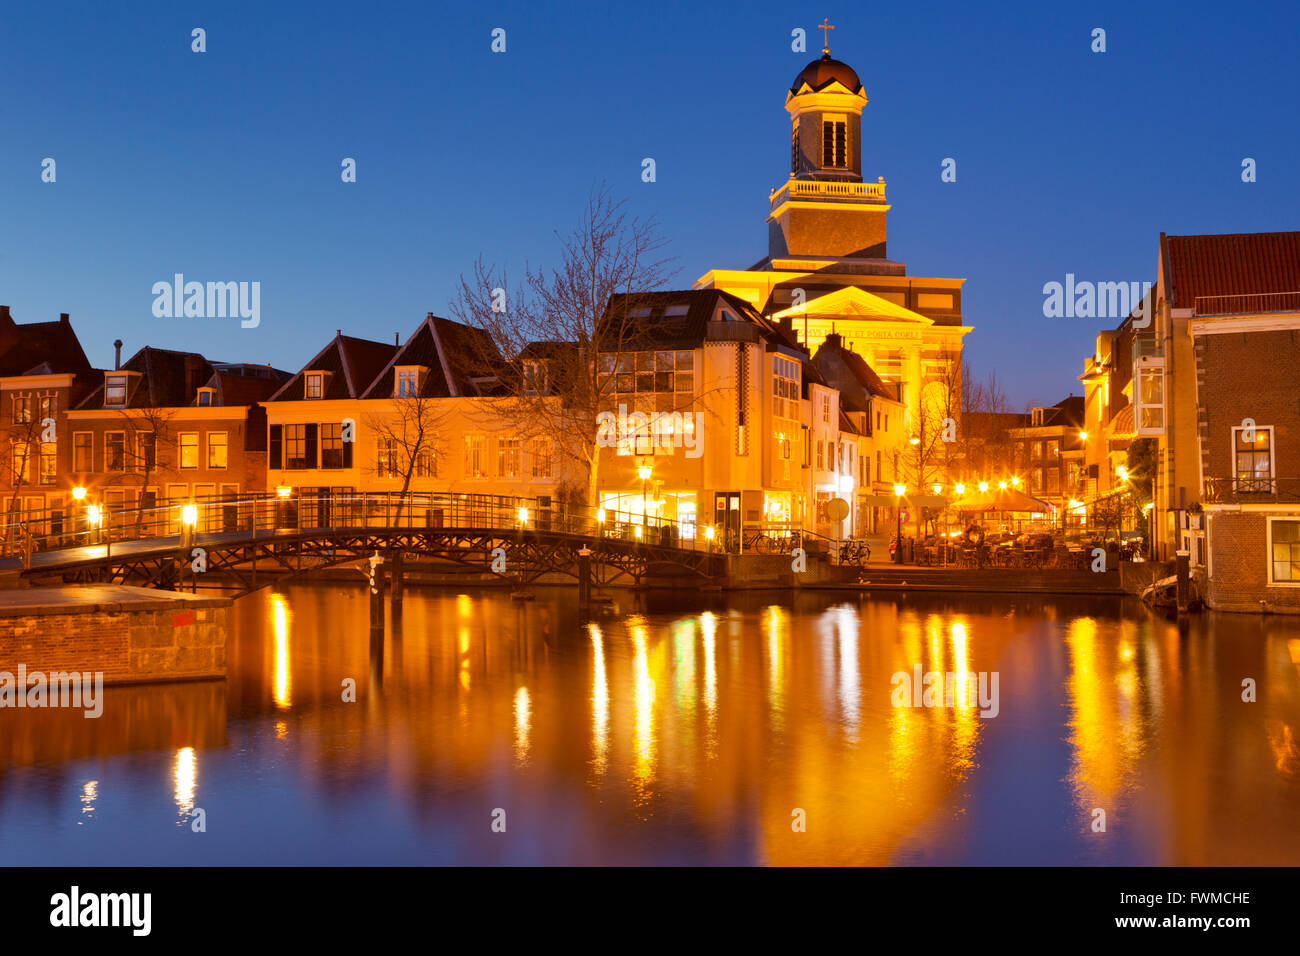 A canal with the Hartebrug church in Leiden, The Netherlands at night. Stock Photo